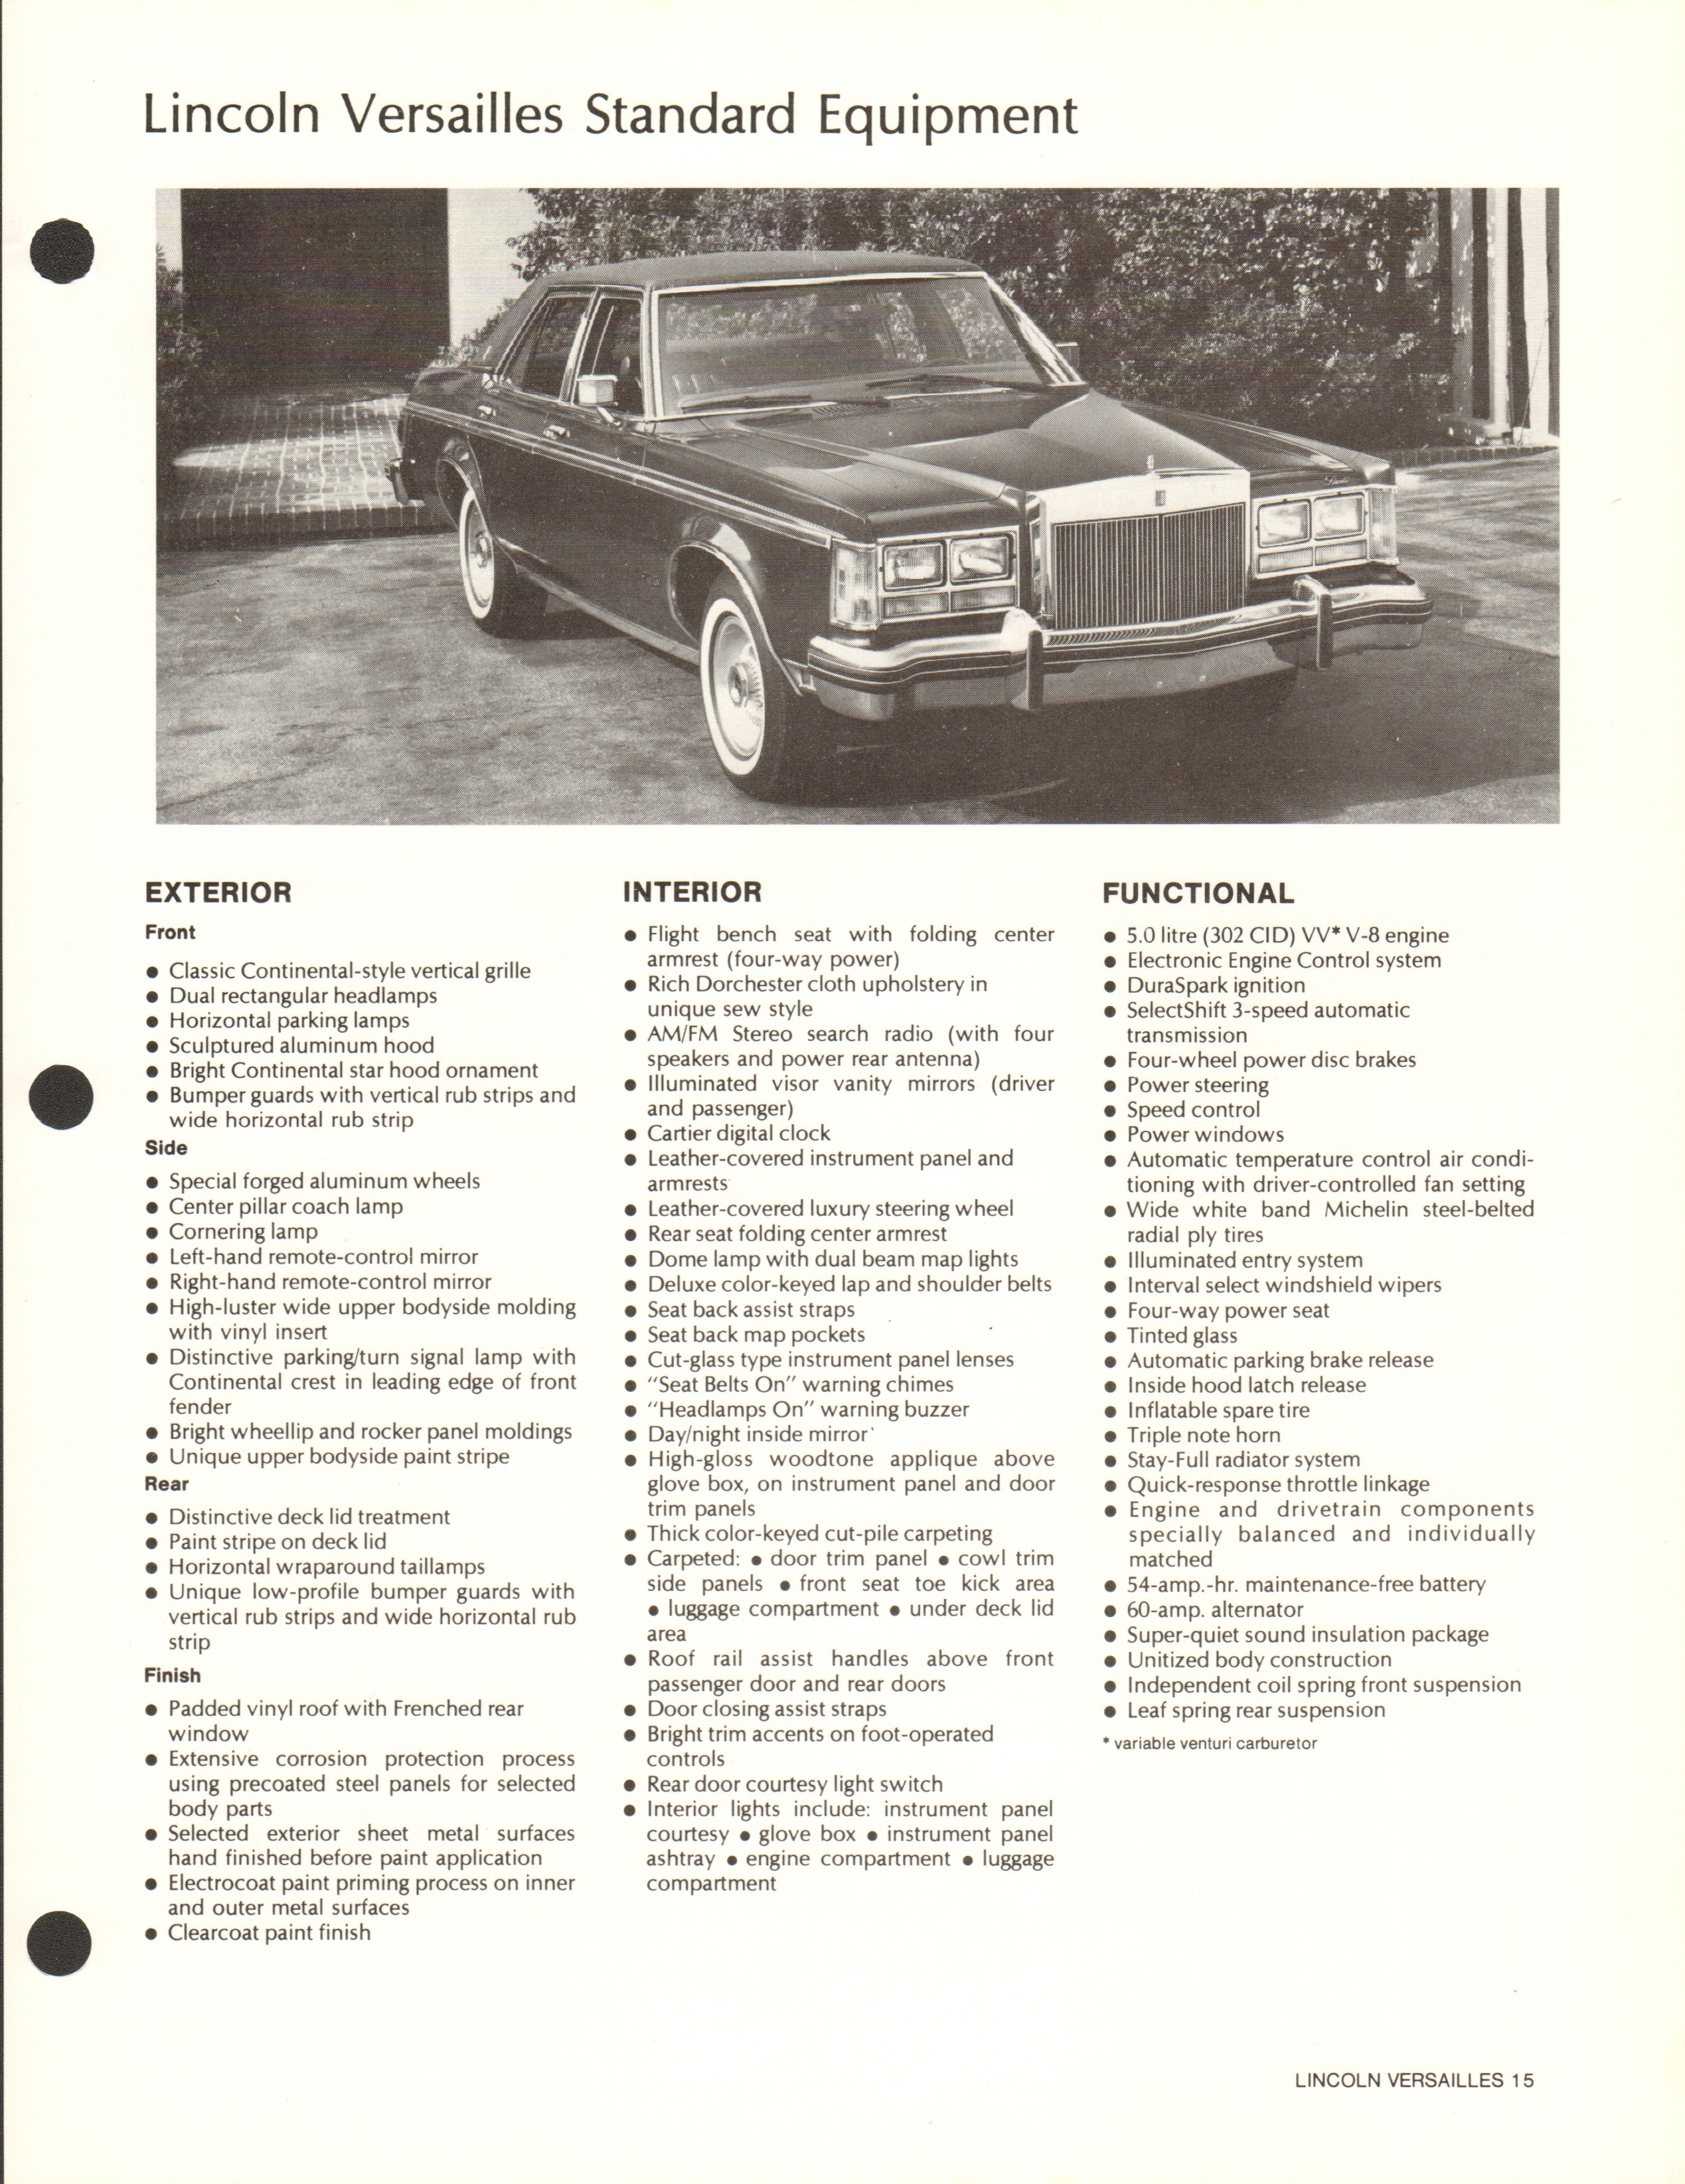 1978 Lincoln Products Fact Book